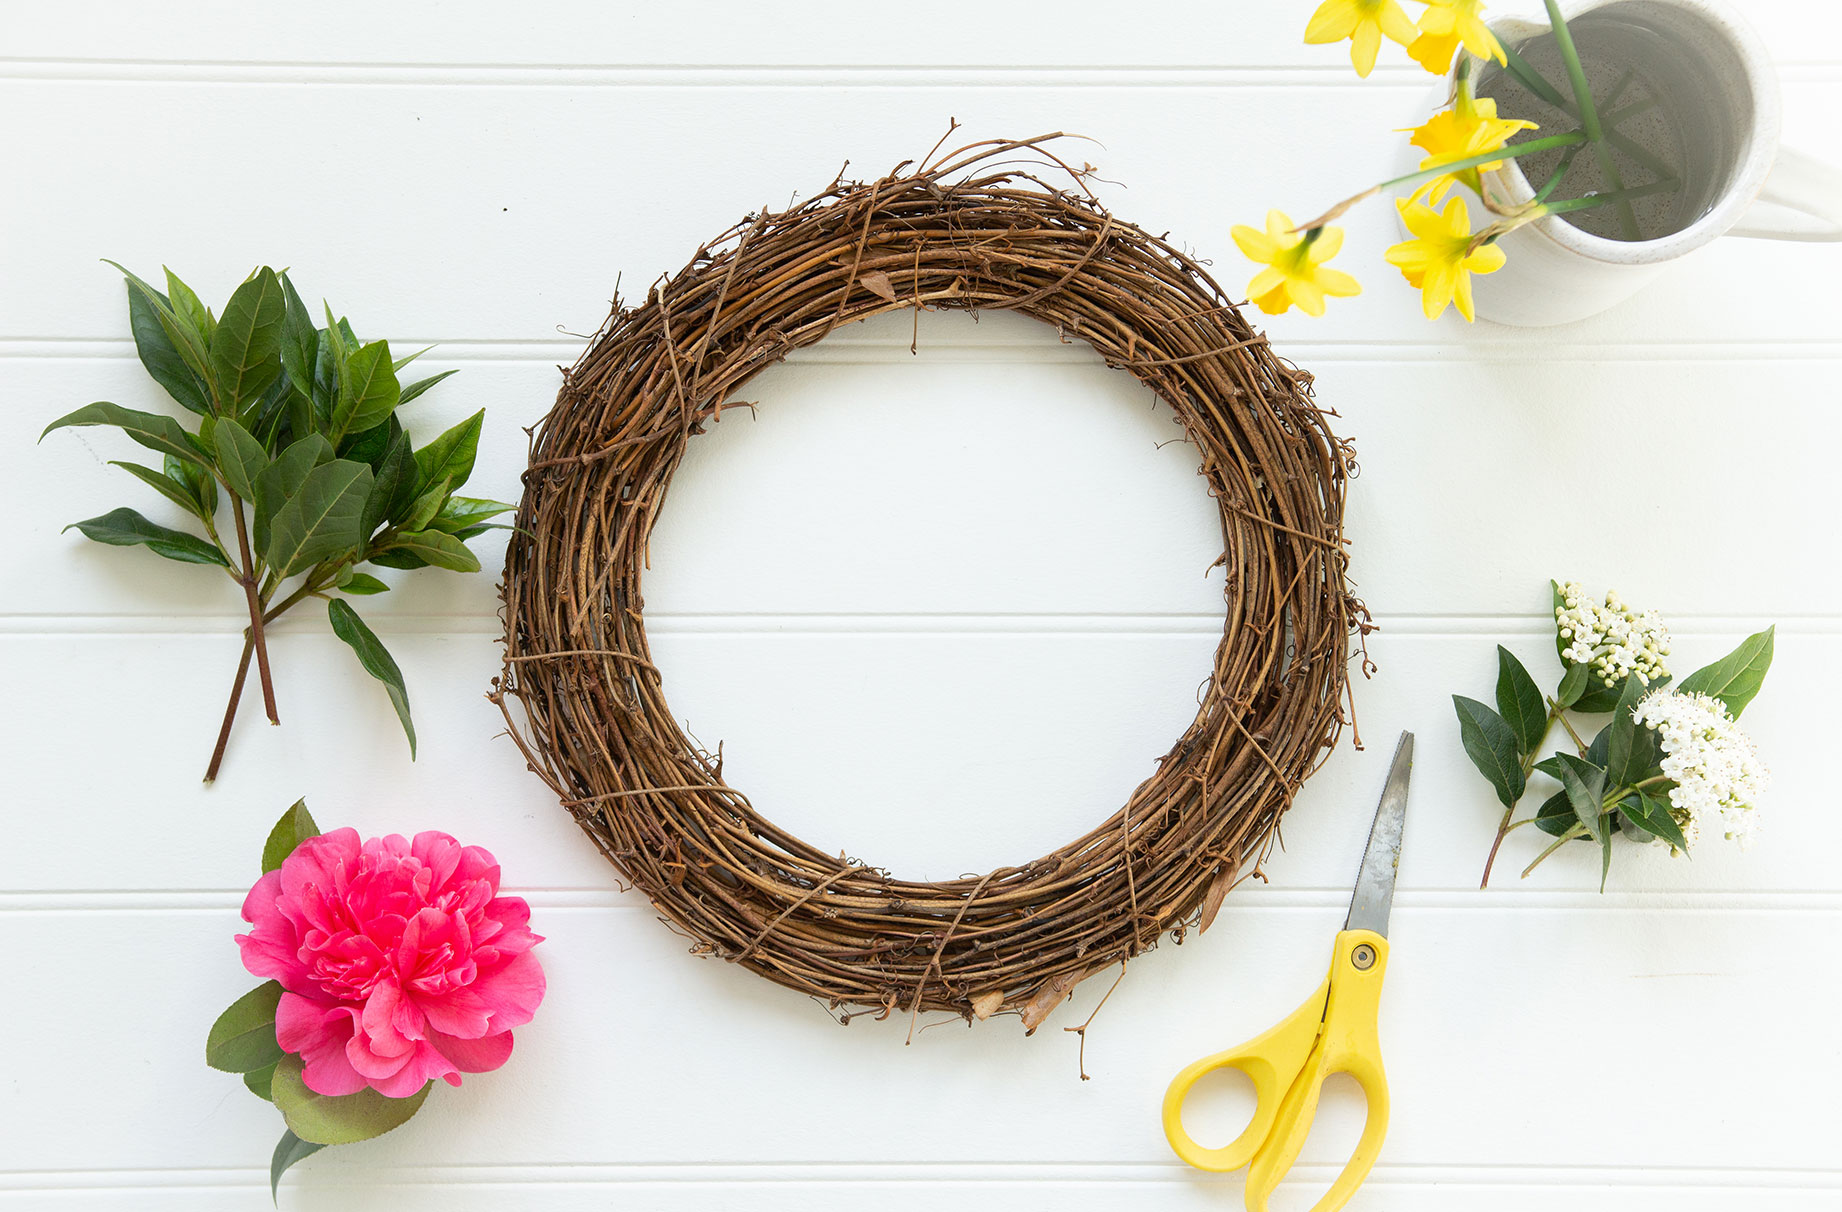 What you need to make an Easter wreath from flowers